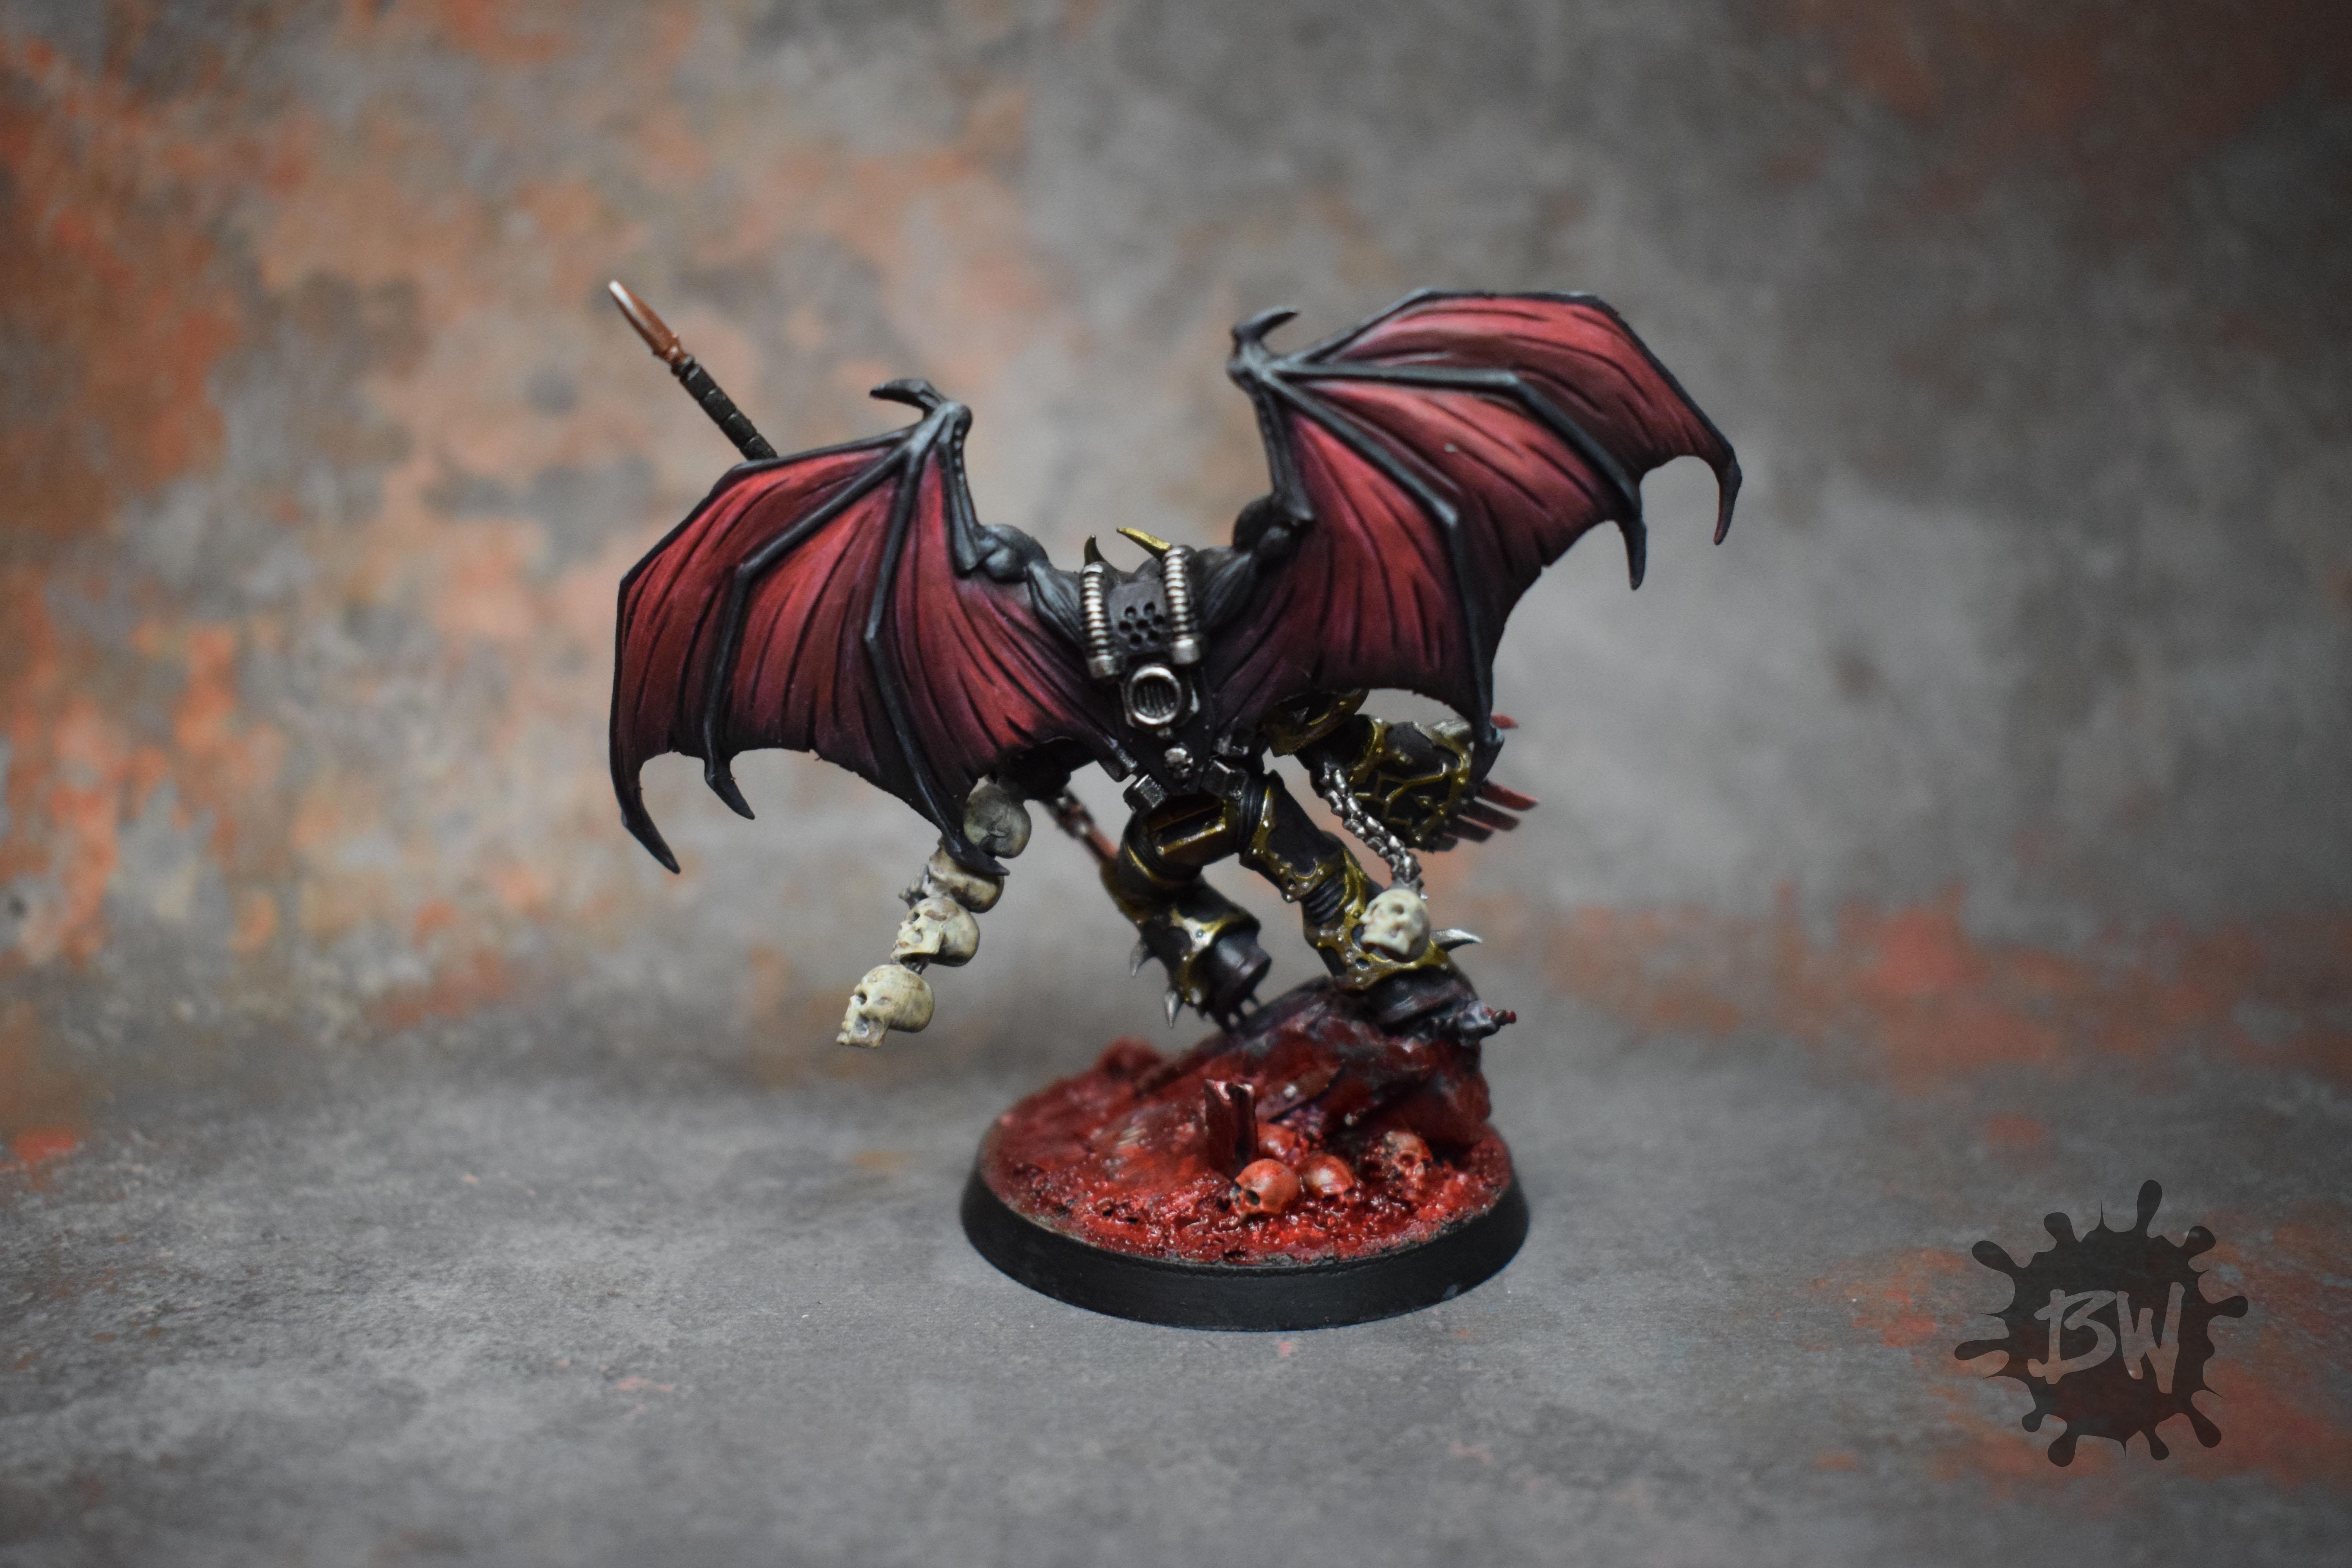 Bw, Chaos, Chaos Lord, Games Workshop, Warhammer 40,000